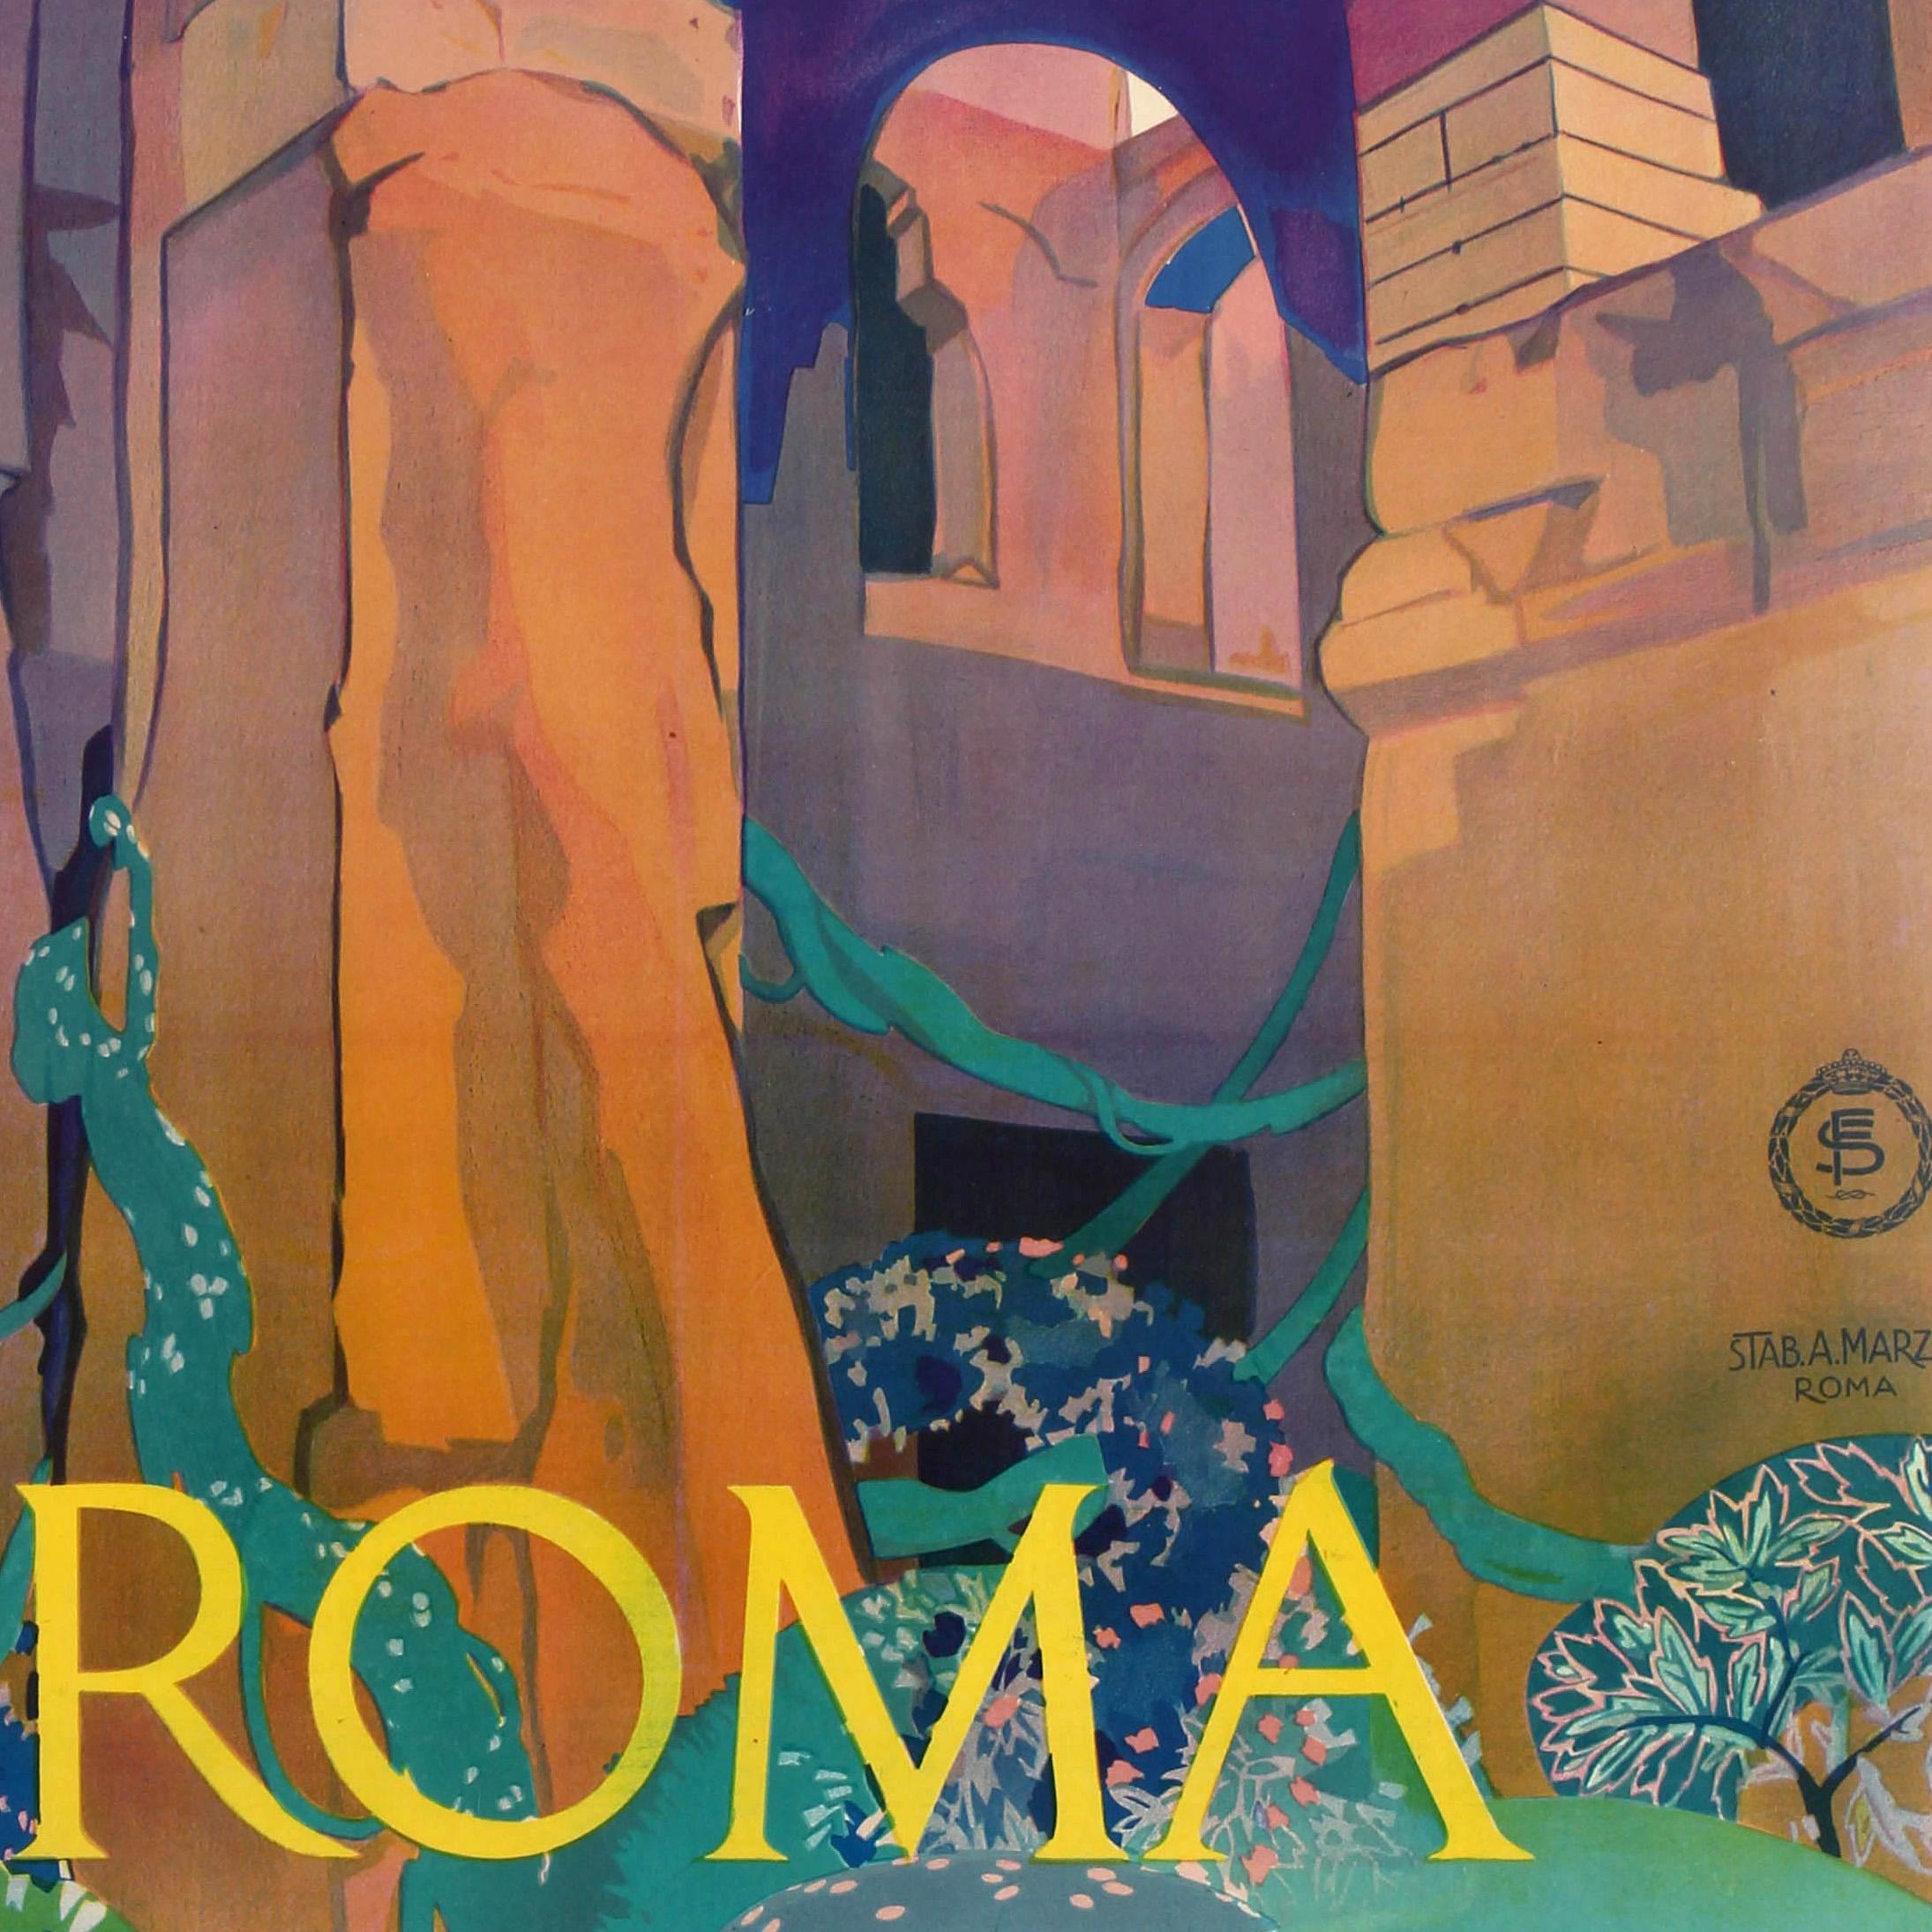 Original vintage travel advertising poster published by the Italian tourist board ENIT to promote the Trajan's Market / Mercato di Traiano ruins in the city of Rome built in 100-110AD as shopping arcades in the Trajan's Forum complex. Stunning